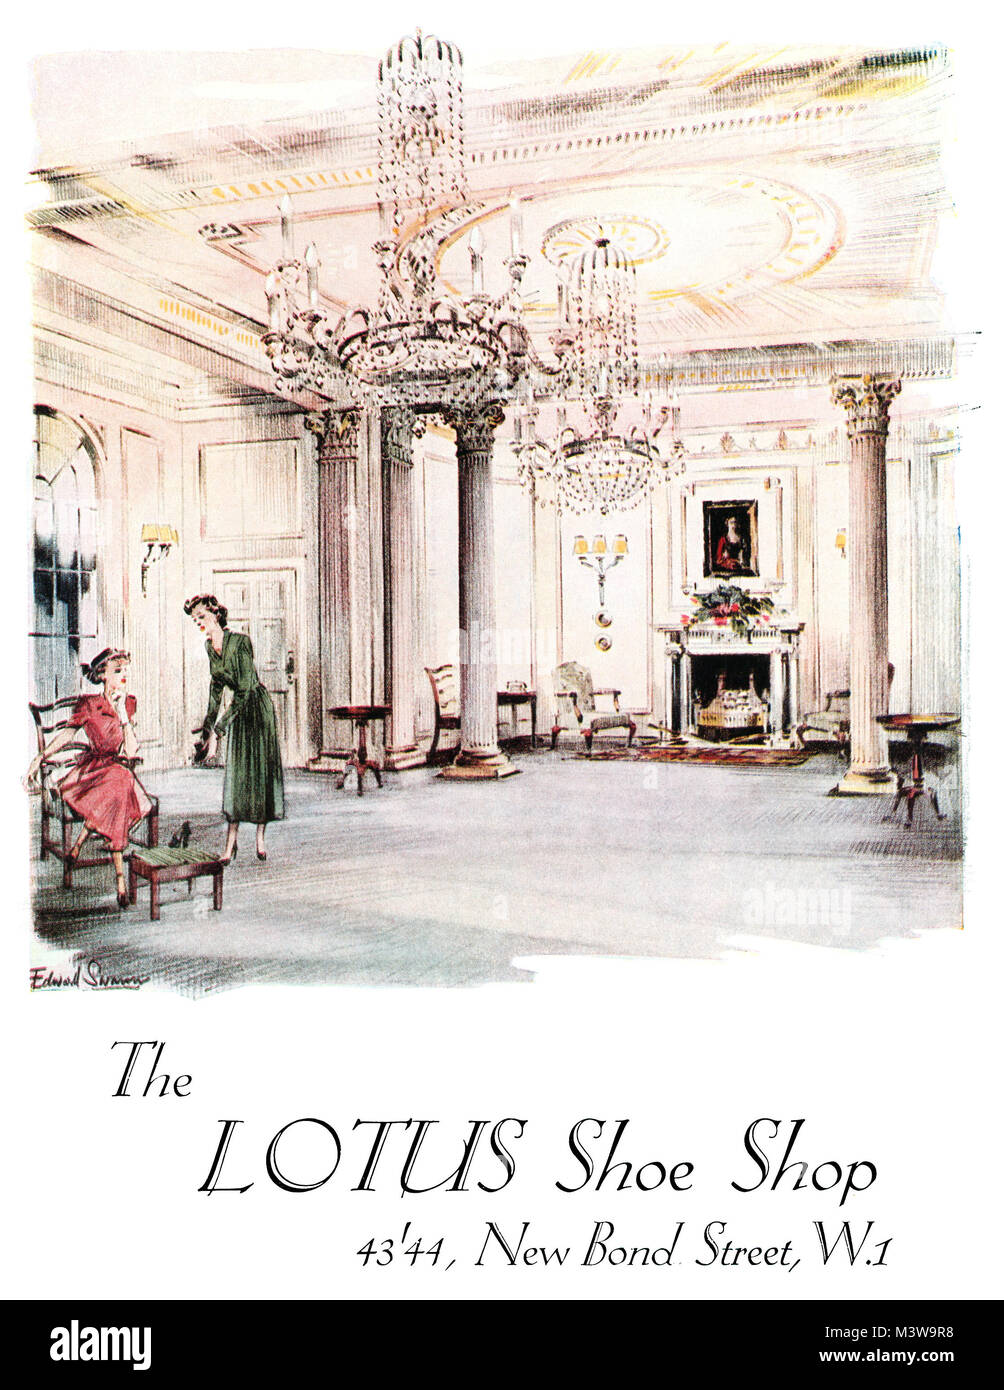 1949 British advertisement for the Lotus Shoe Shop in New Bond Street, London. Stock Photo